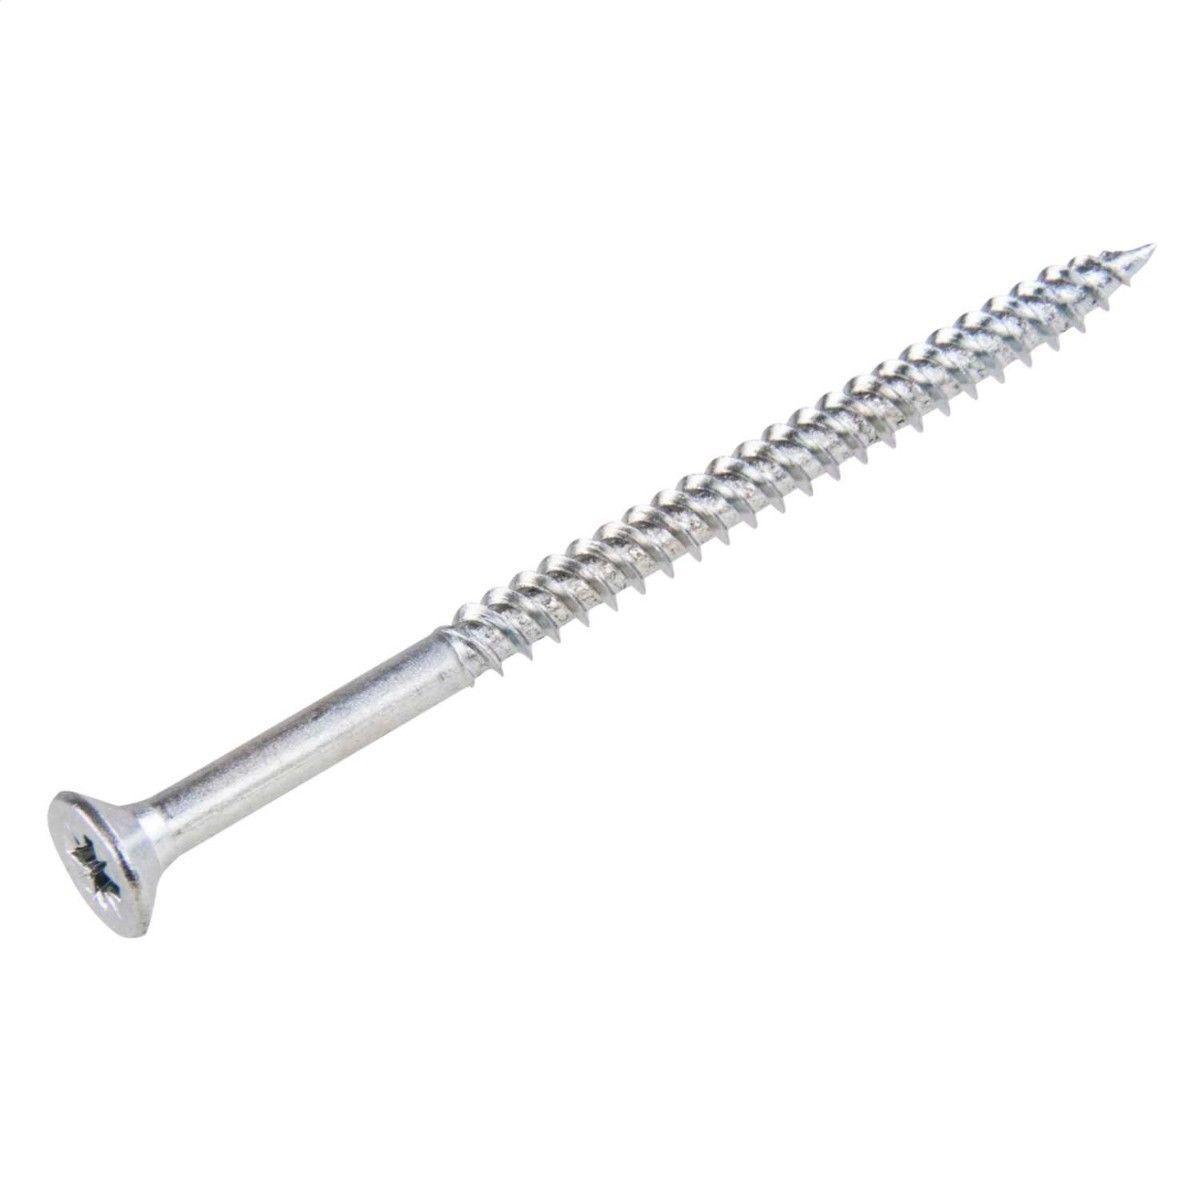 10 x 3 Pozi Countersunk Hardened Twin Thread Wood Screws Zinc Plated 35 Pack 1642 (Large Letter Rate)